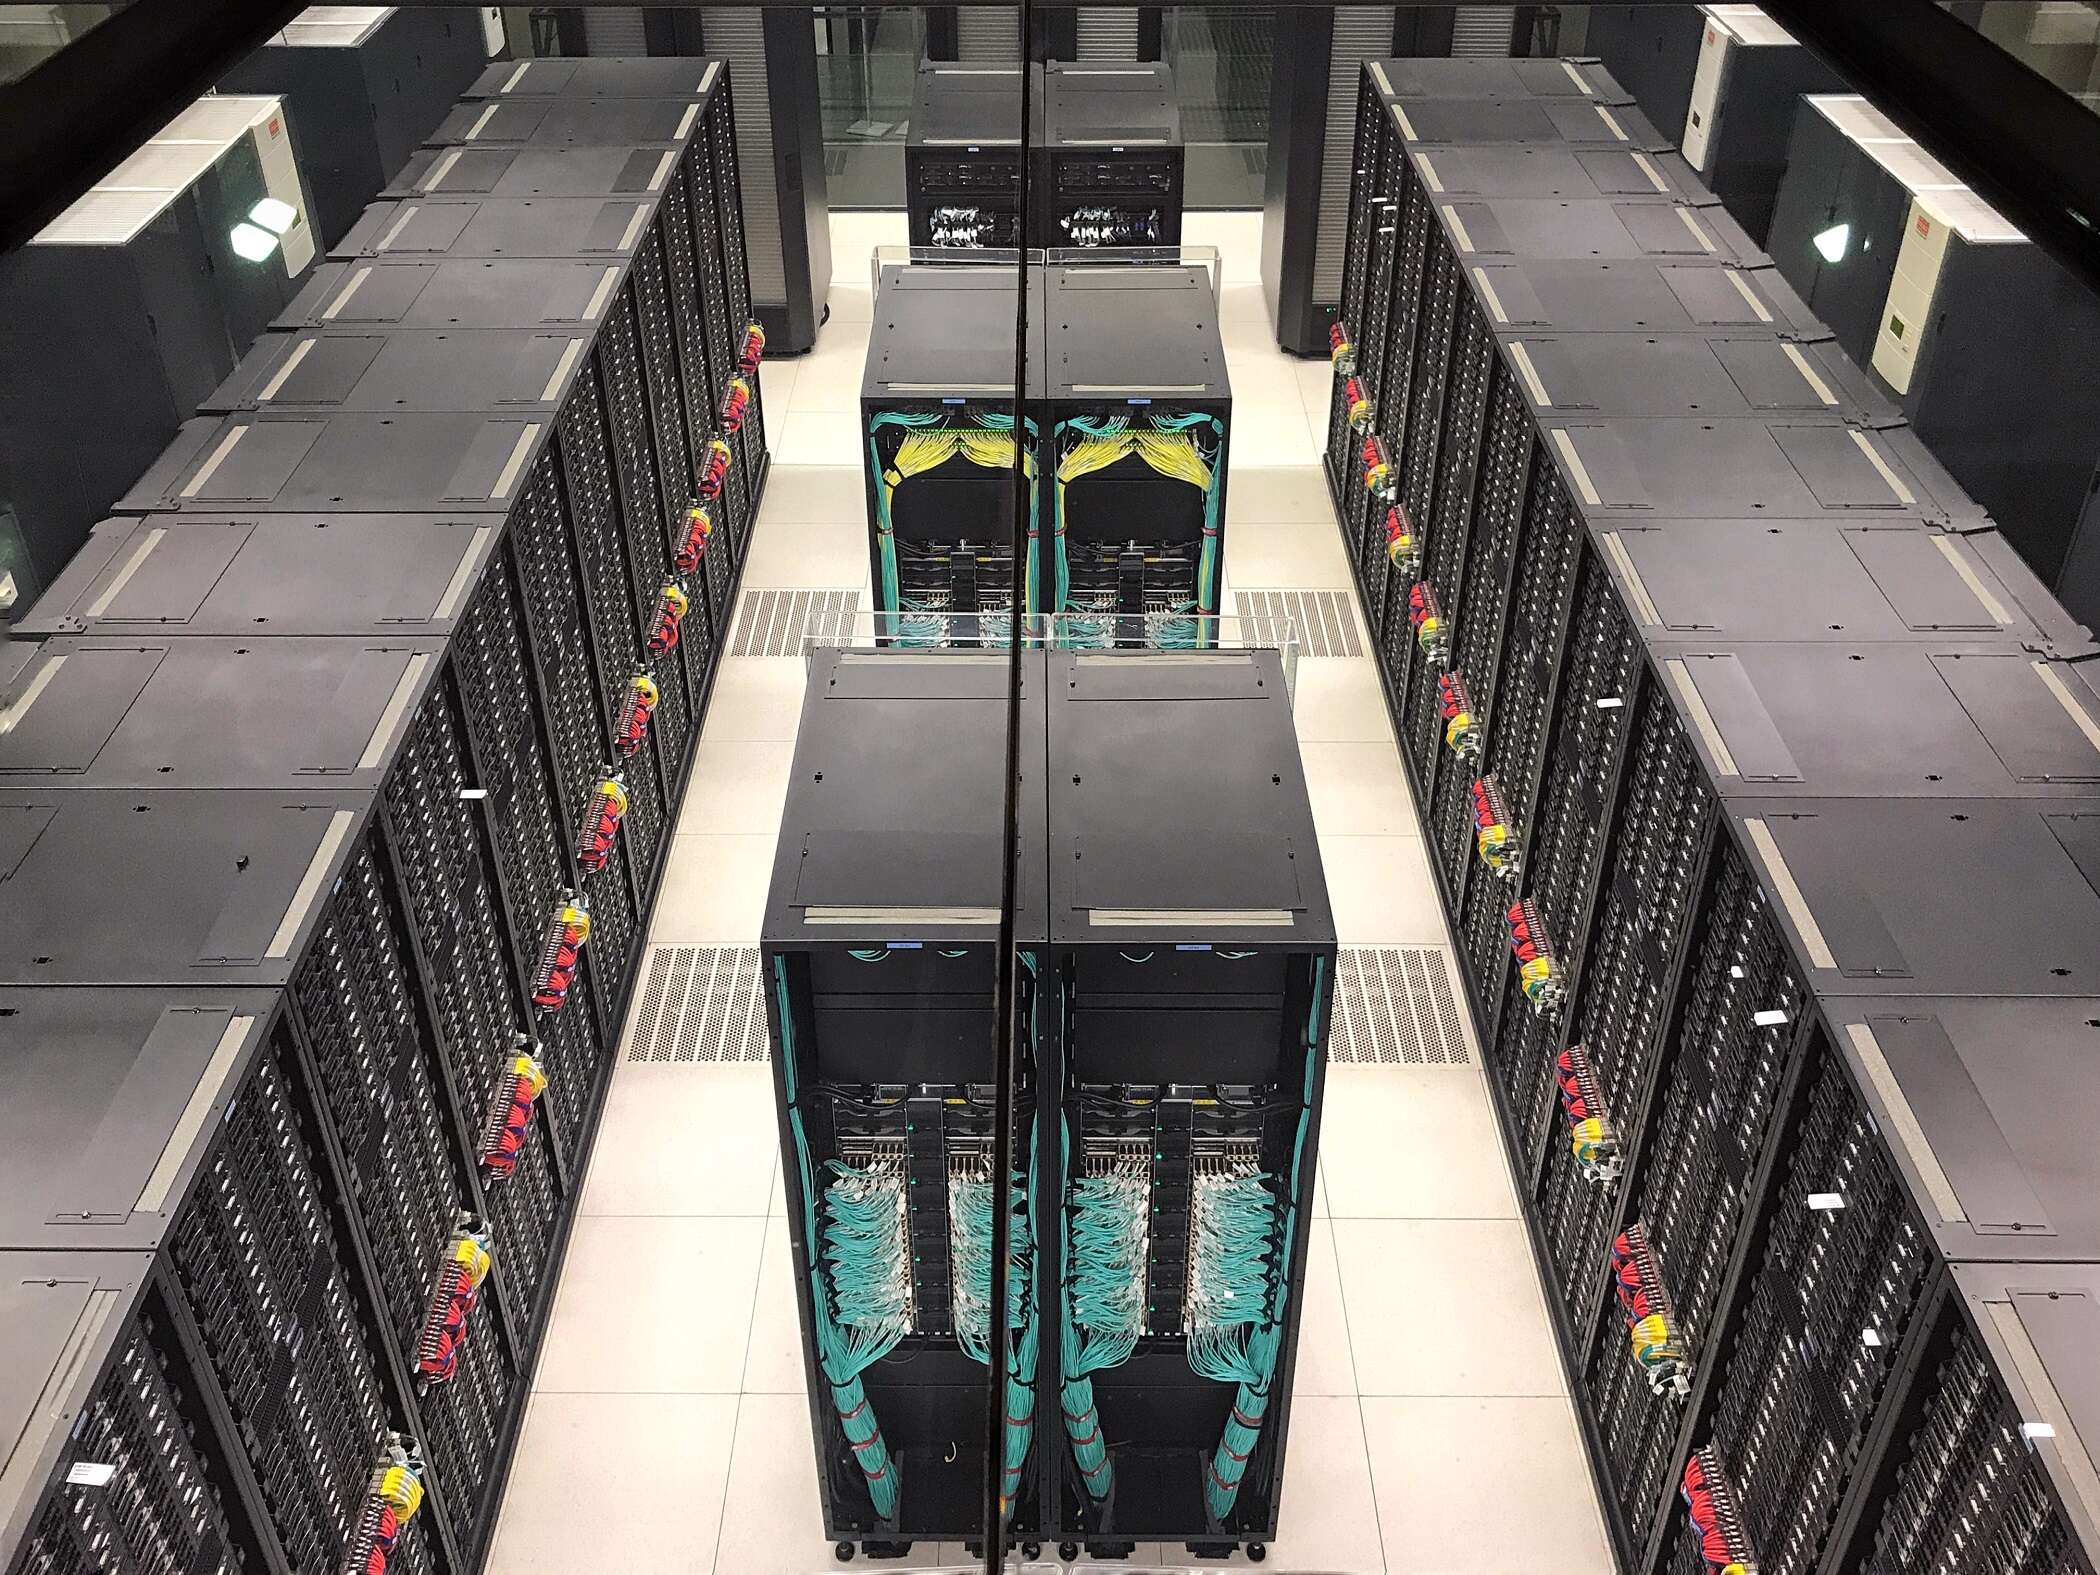 Supercomputing is the latest frontier in the EU's bid for digital sovereignty